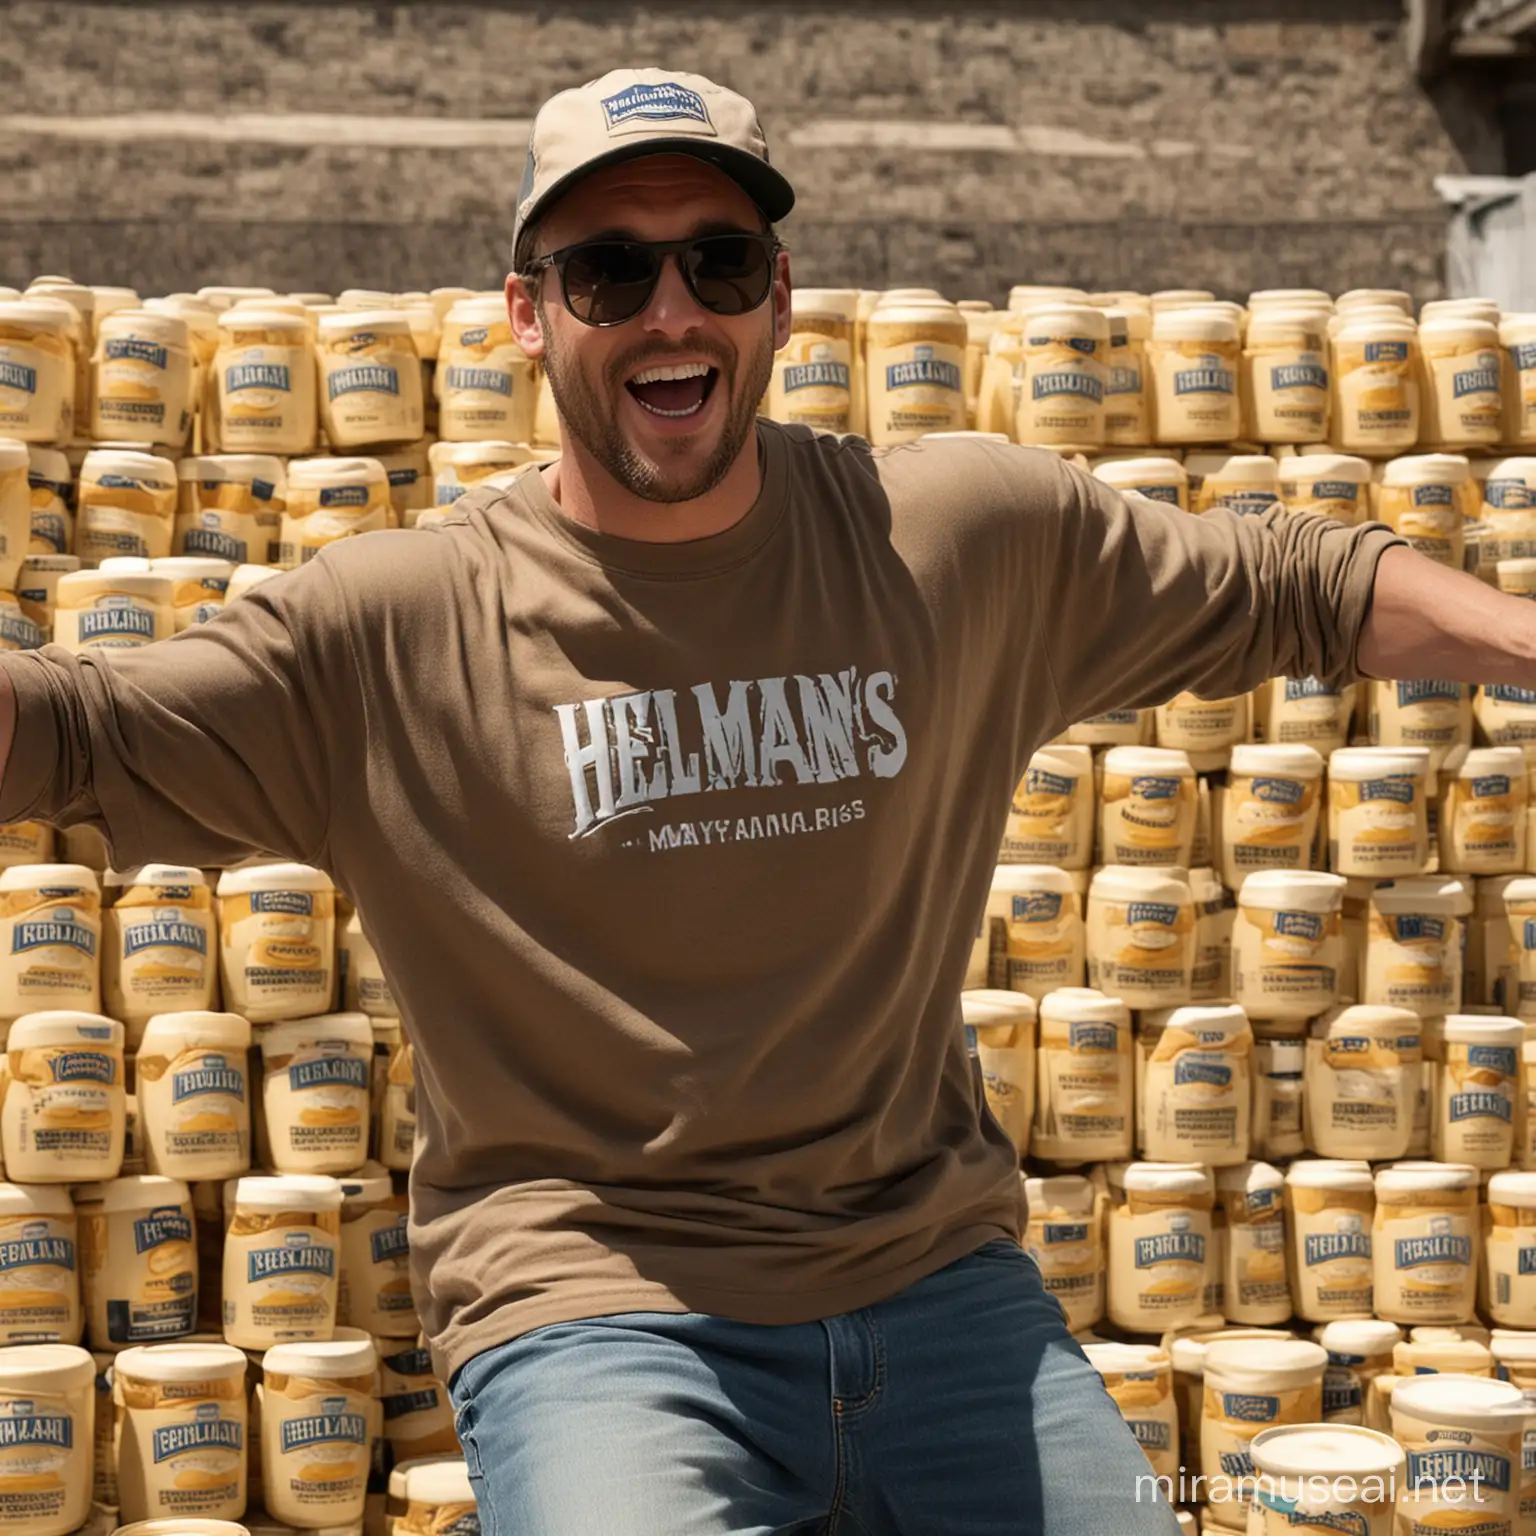 Man Dancing with Giant Jars of Hellmans Mayonnaise